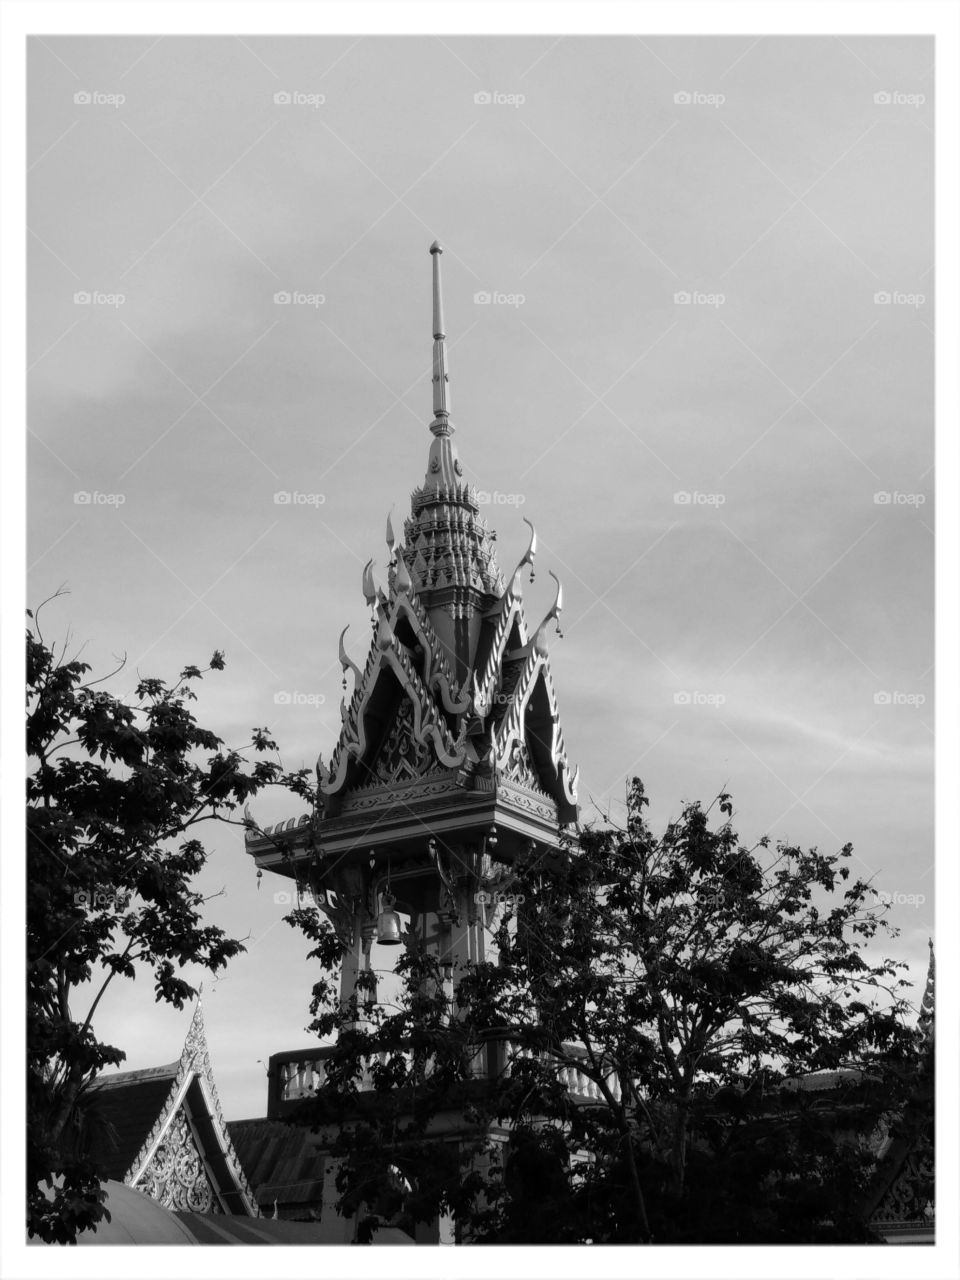 The belfry. The bekfry in Thailand in look black and white